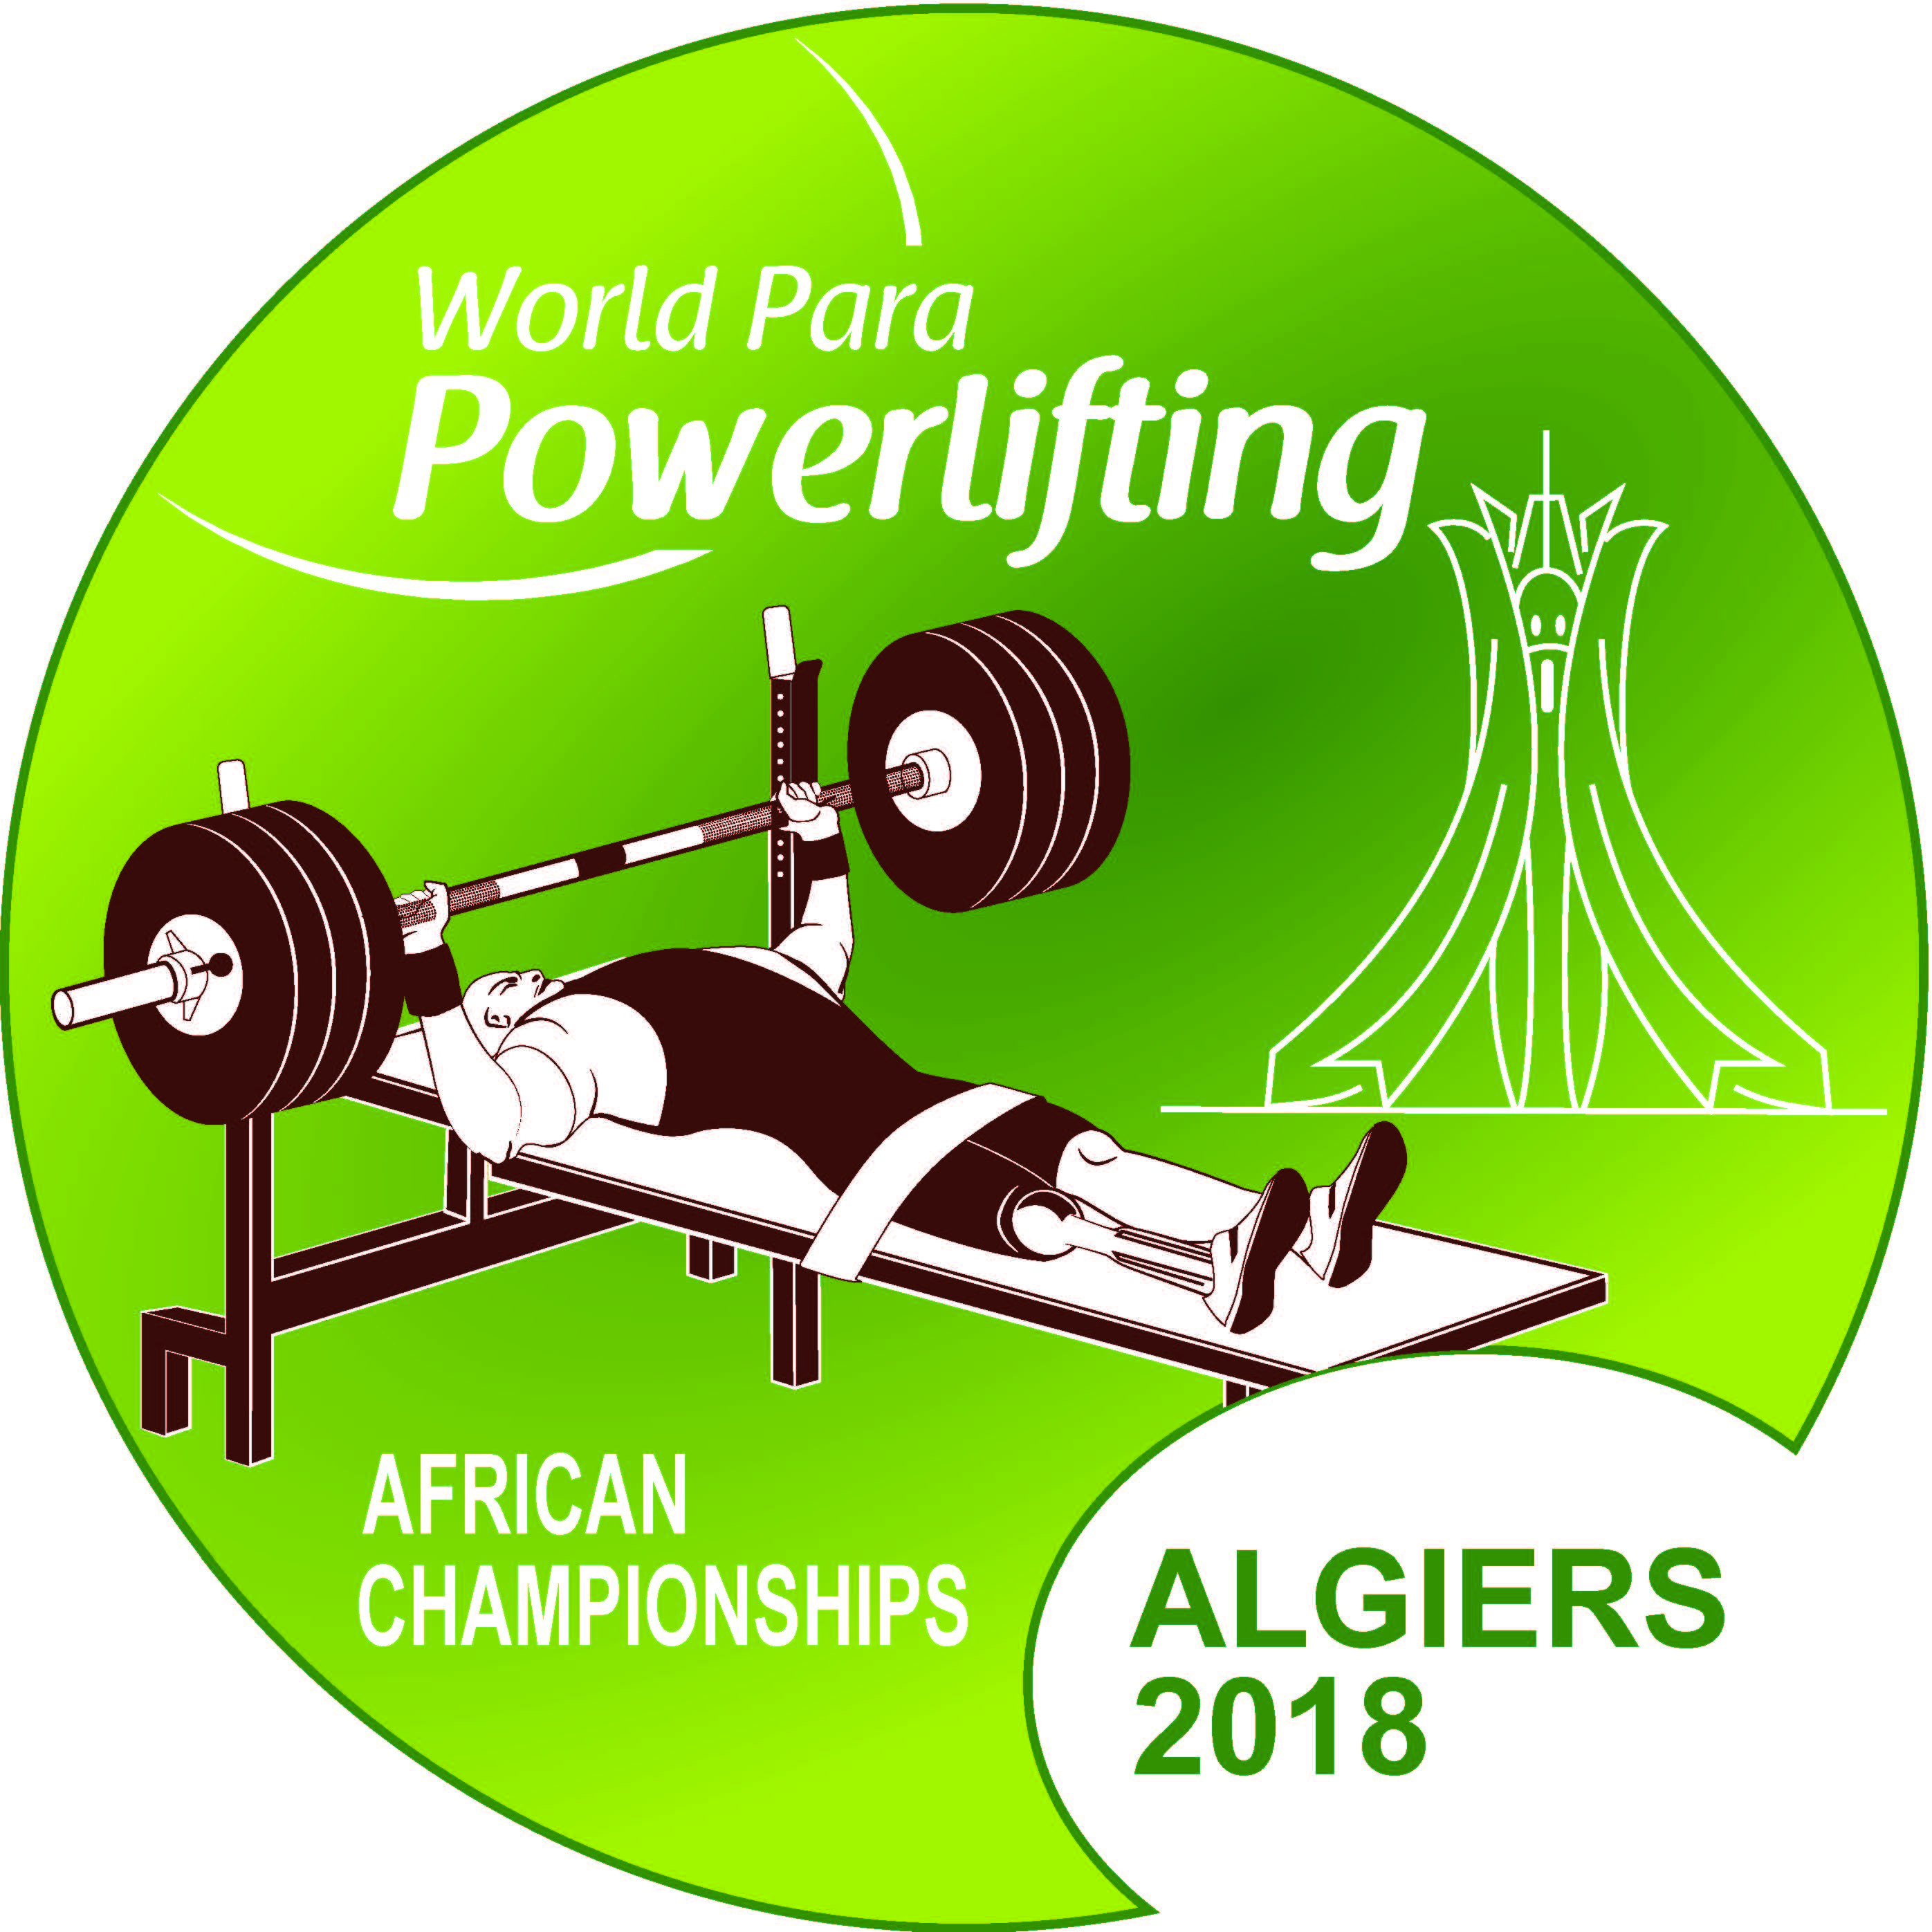 the official logo of the 2018 World Para Powerlifting African Championships